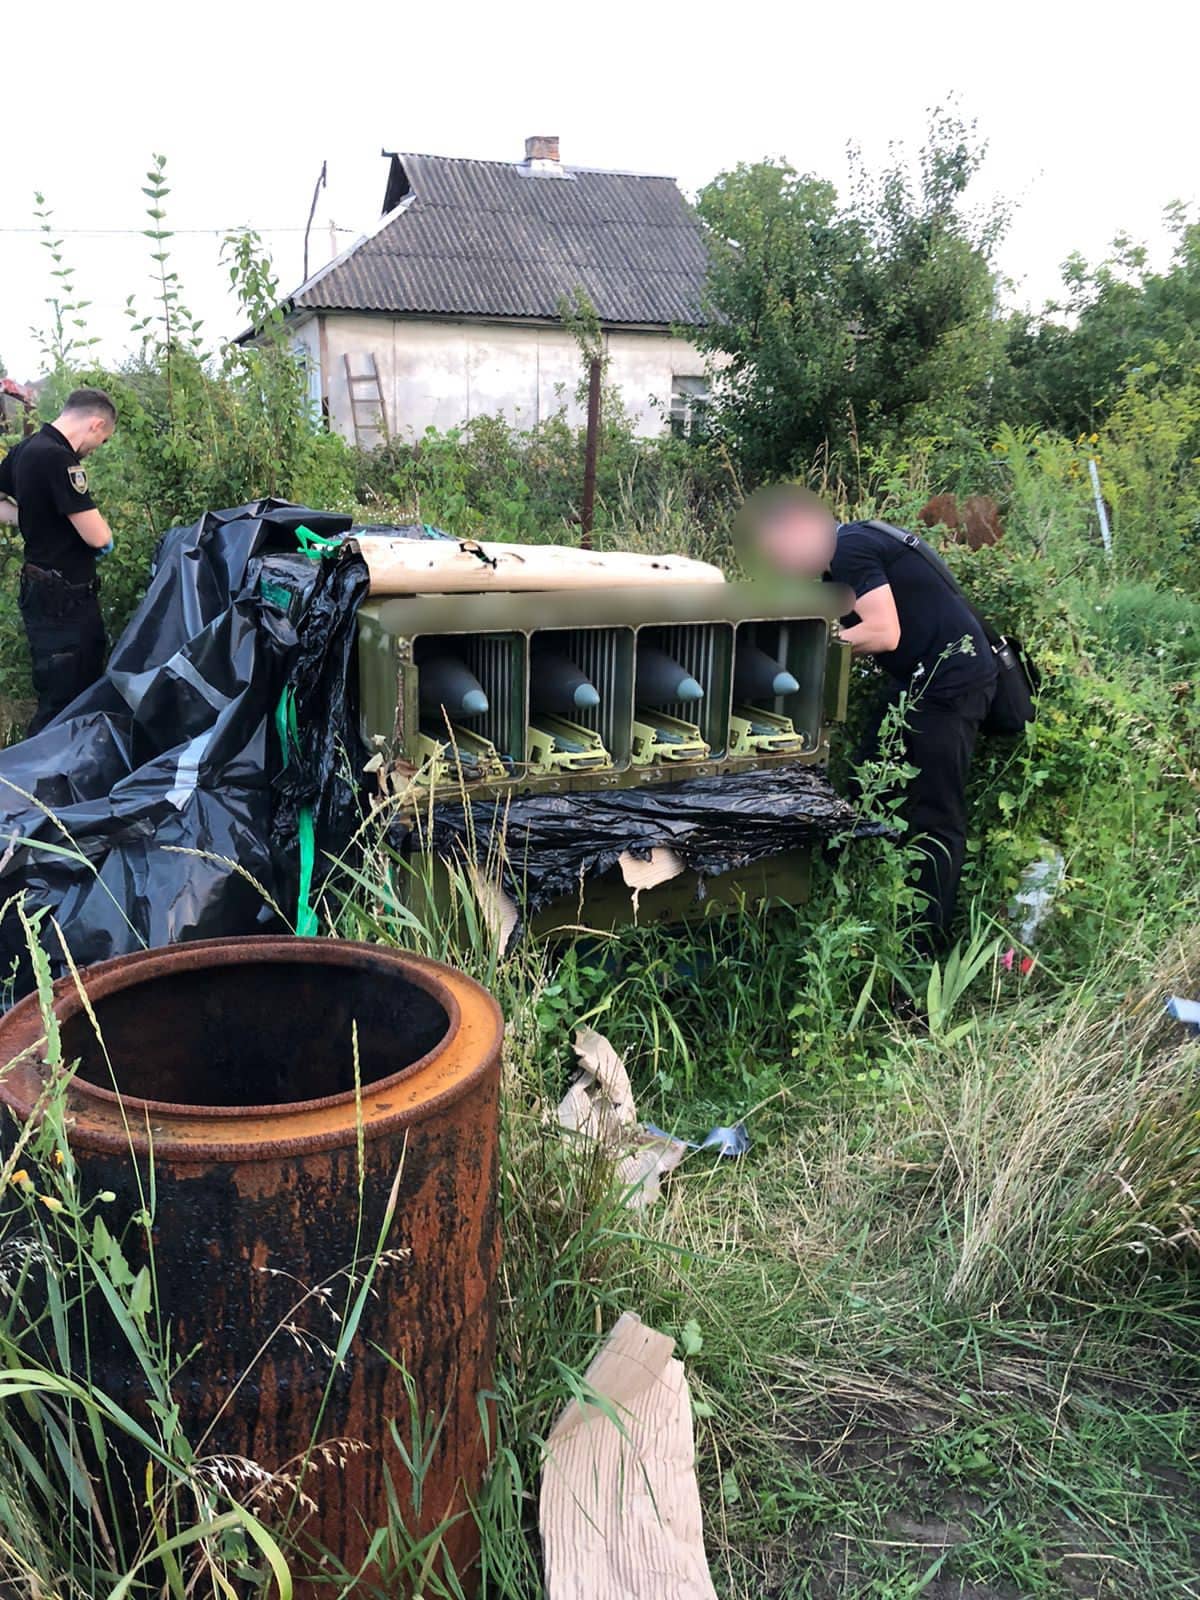 Ukrainian National Police investigate Tor air defense missiles they discovered. (Ukrainian National Police photo)